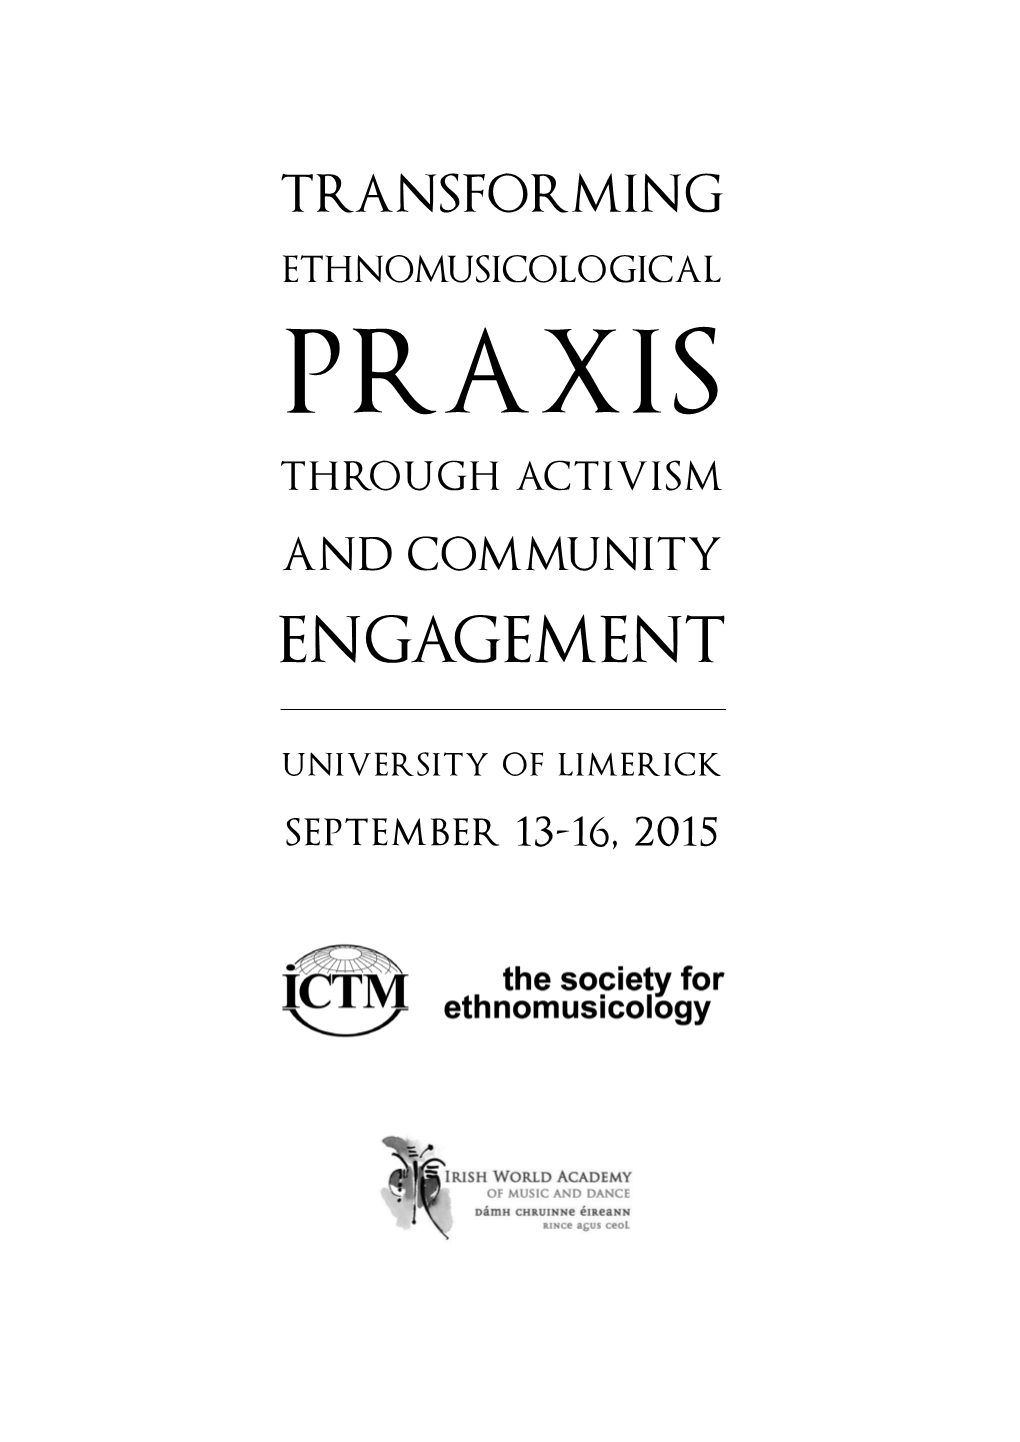 Praxis Through Activism and Community Engagement University of Limerick September 13-16, 2015